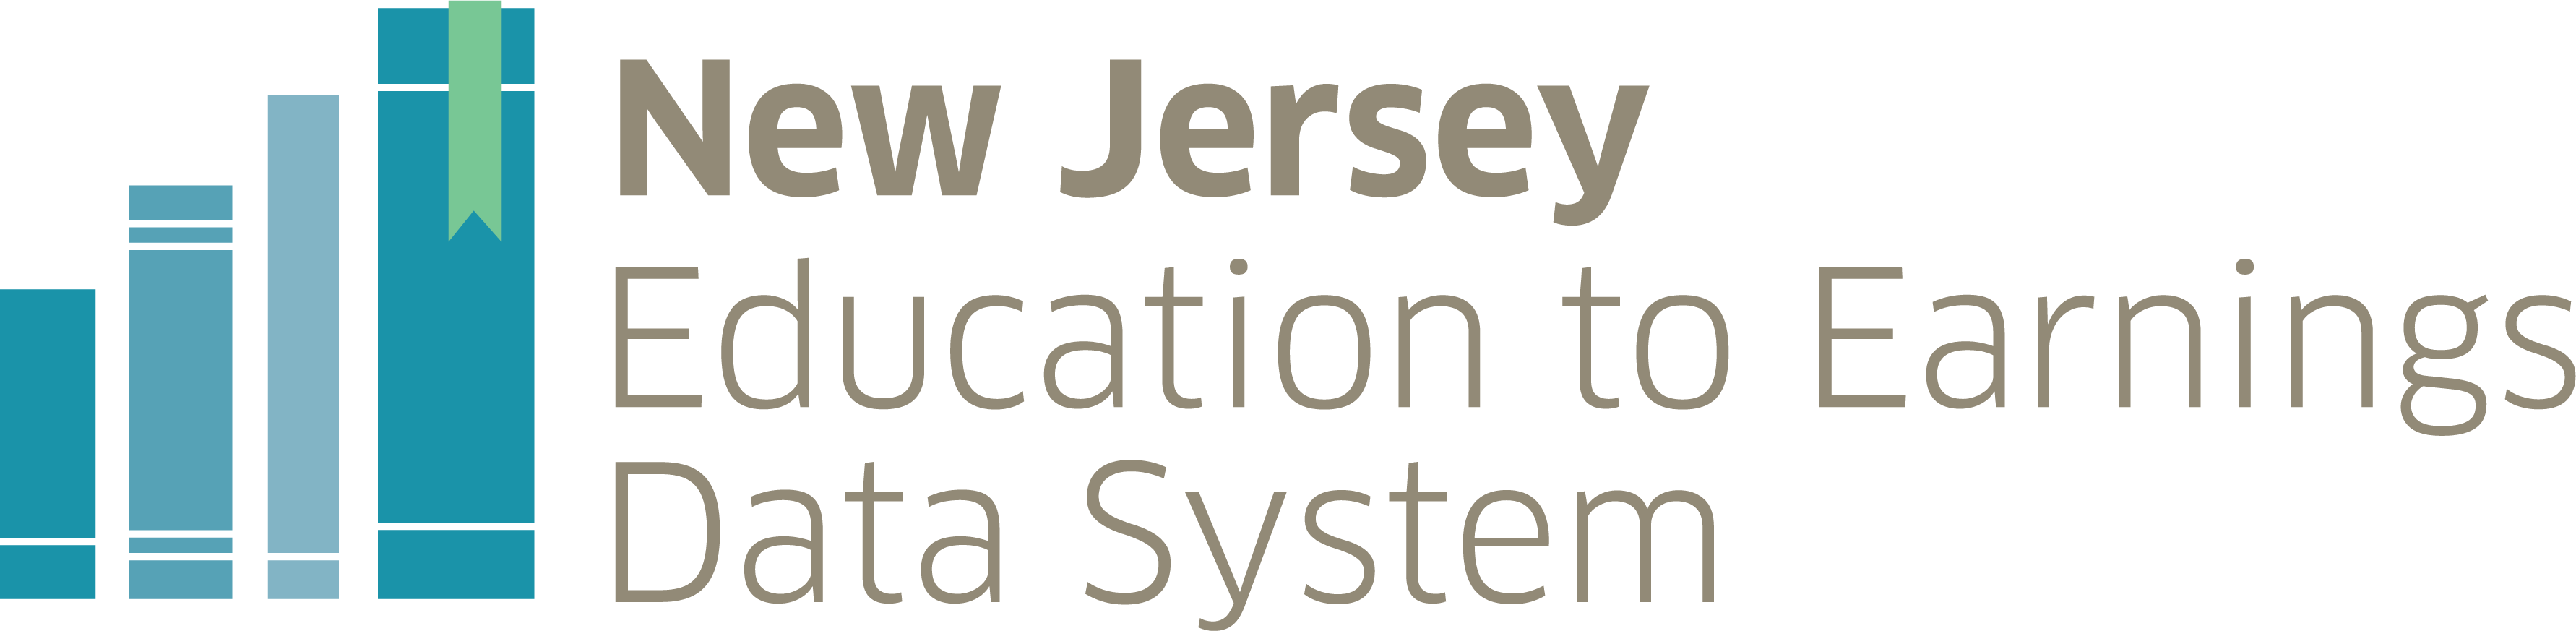 New Jersey Education to Earning Data System